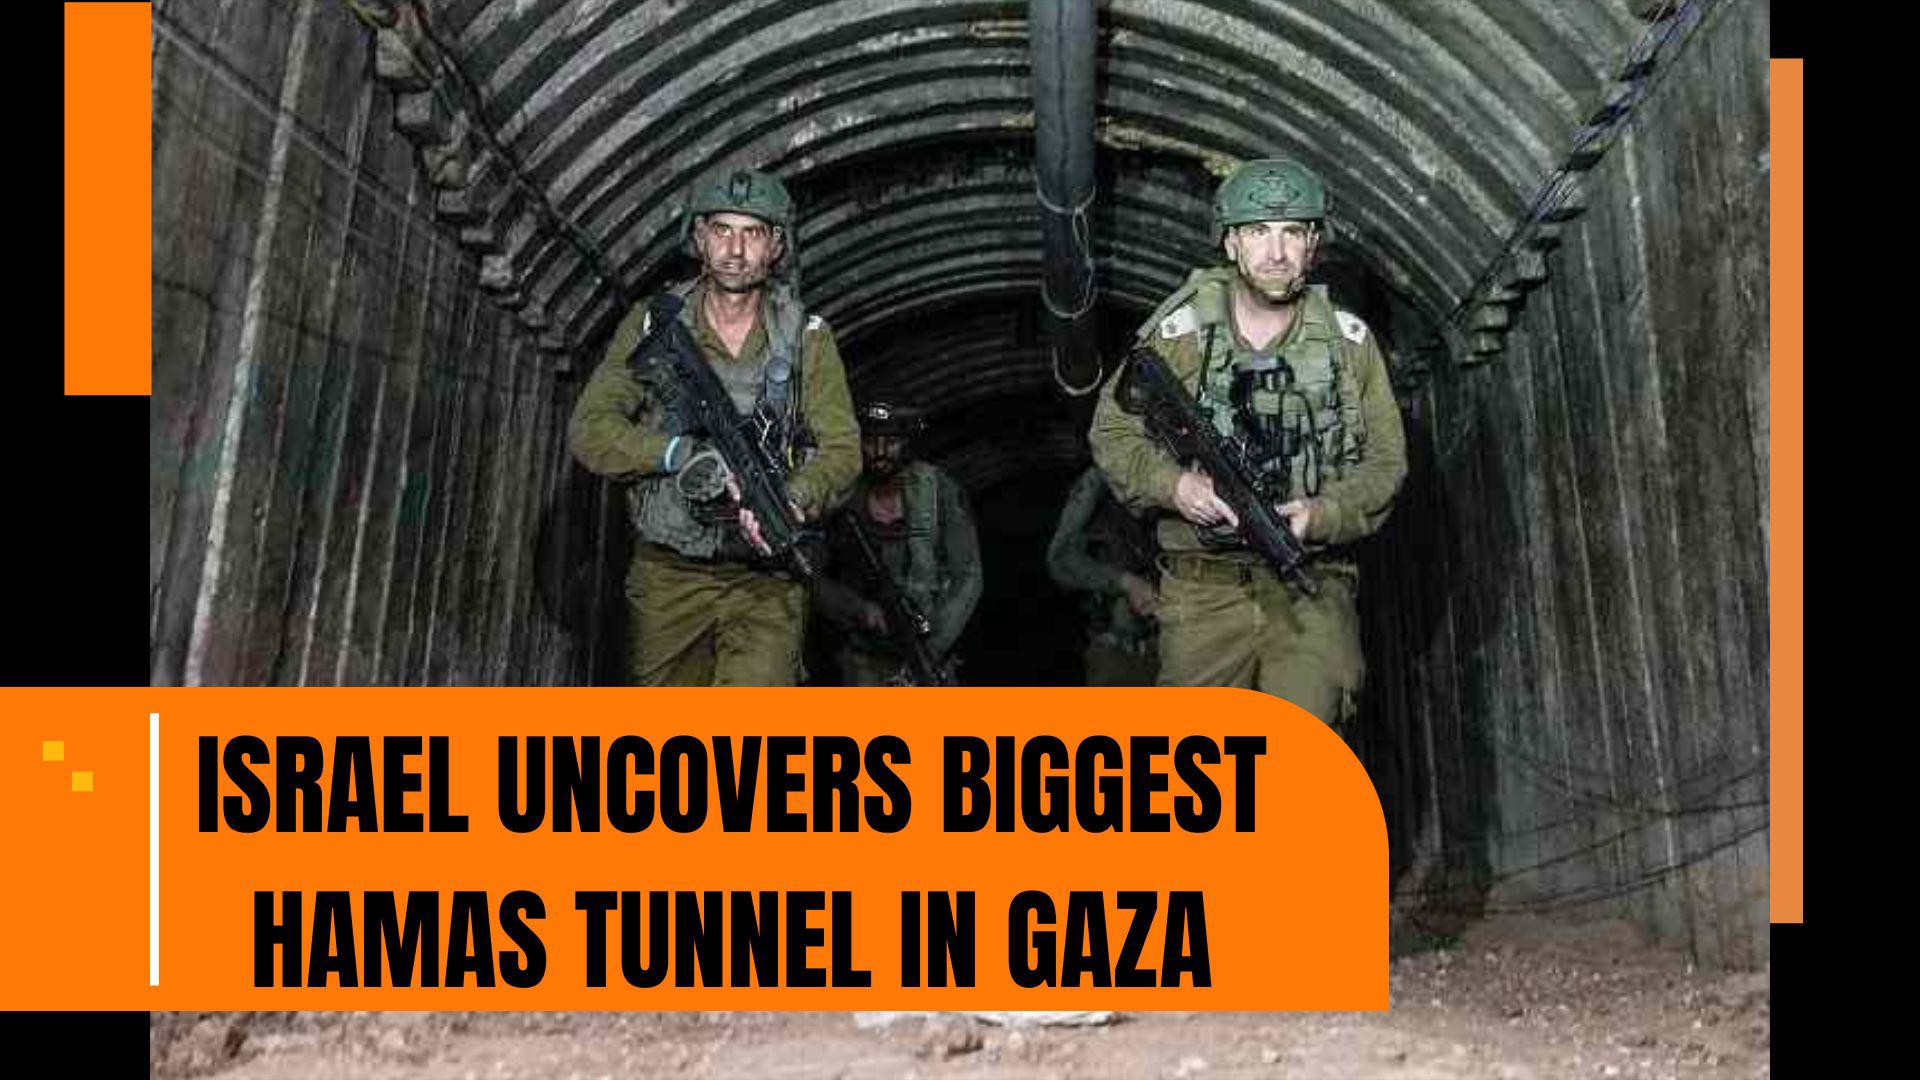 Israeli army says it has uncovered biggest Hamas tunnel yet